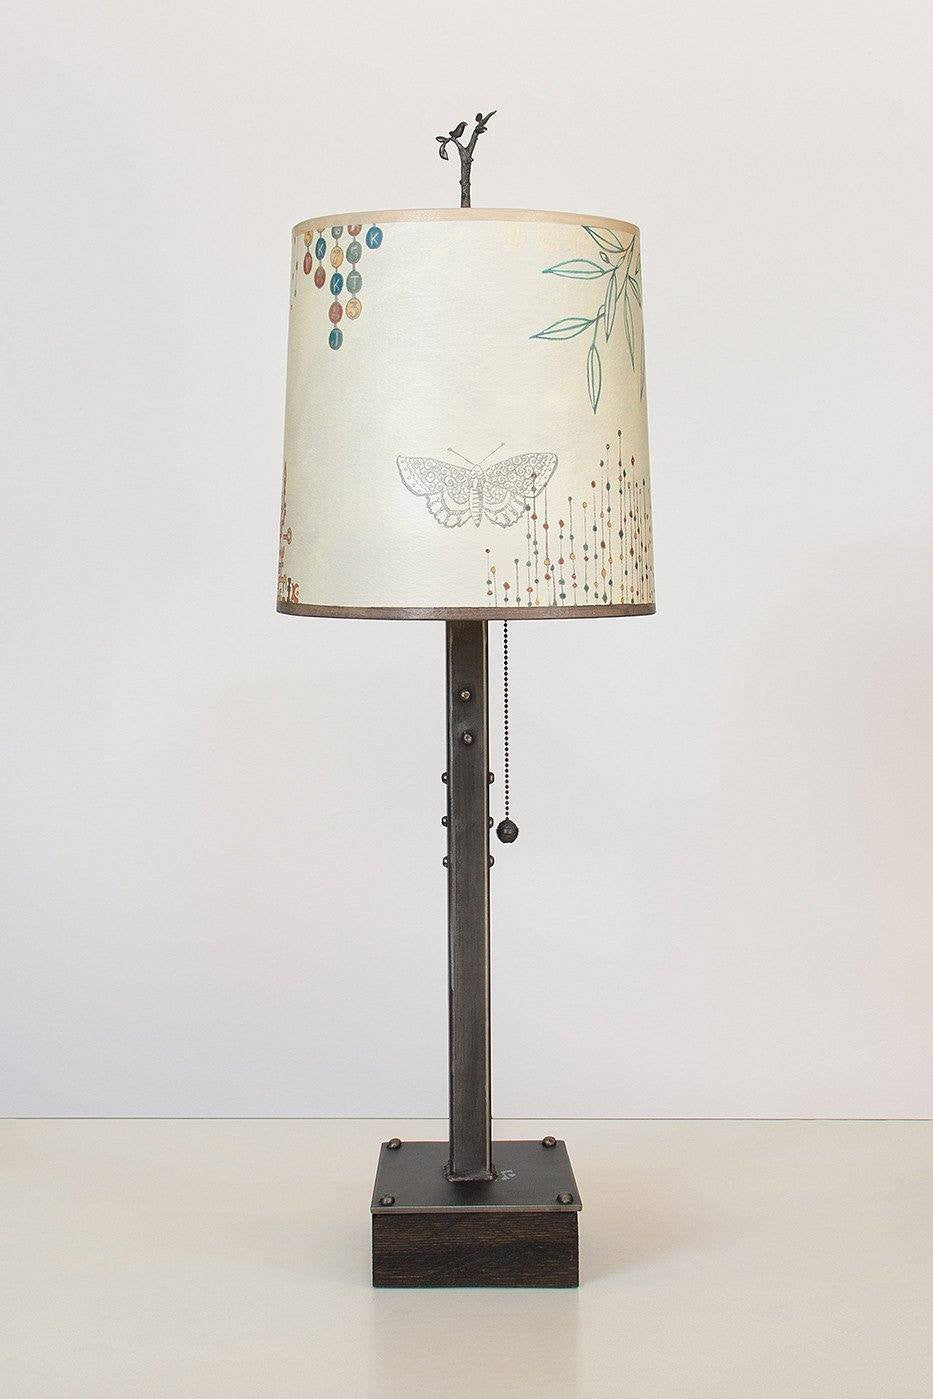 Janna Ugone &amp; Co Table Lamps Steel Table Lamp on Wood with Medium Drum Shade in Ecru Journey